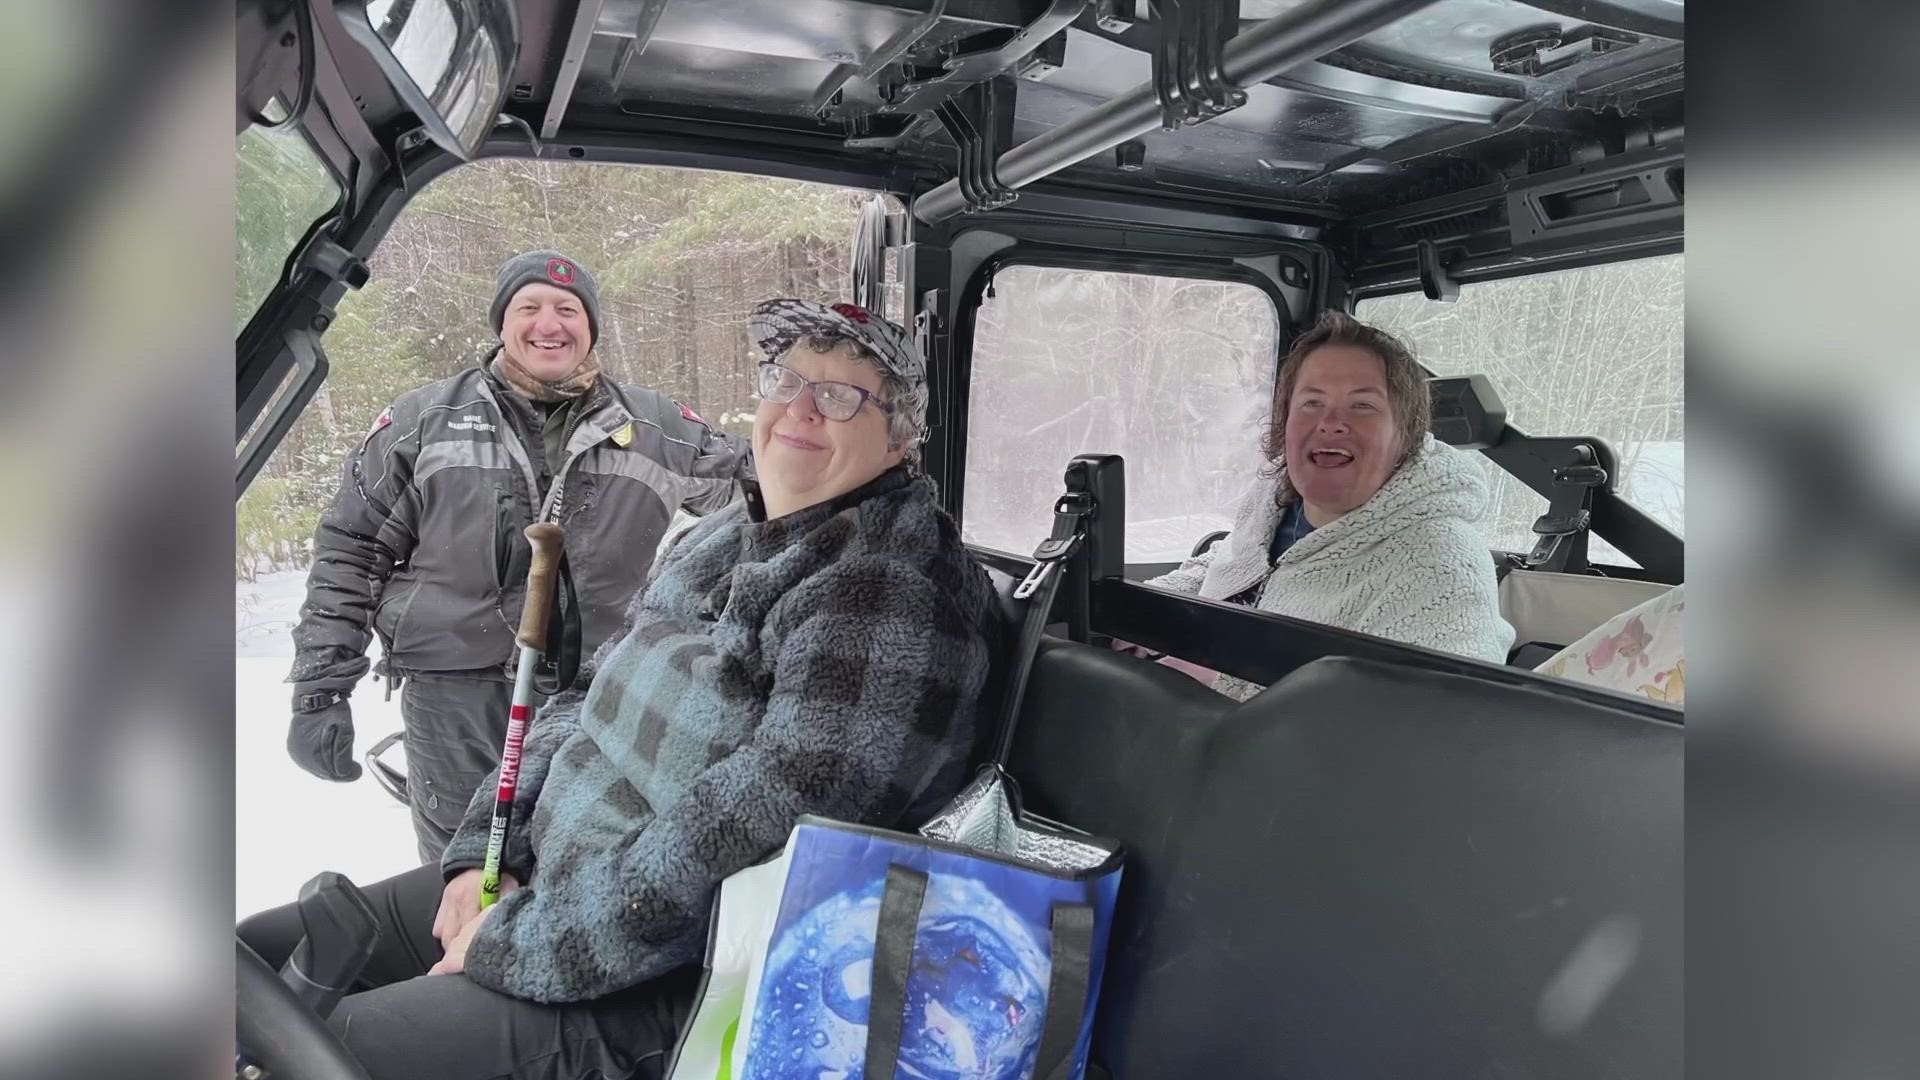 Officials said the women spent Saturday night in their vehicle with no heat and outside temperatures of approximately 15 degrees below zero.